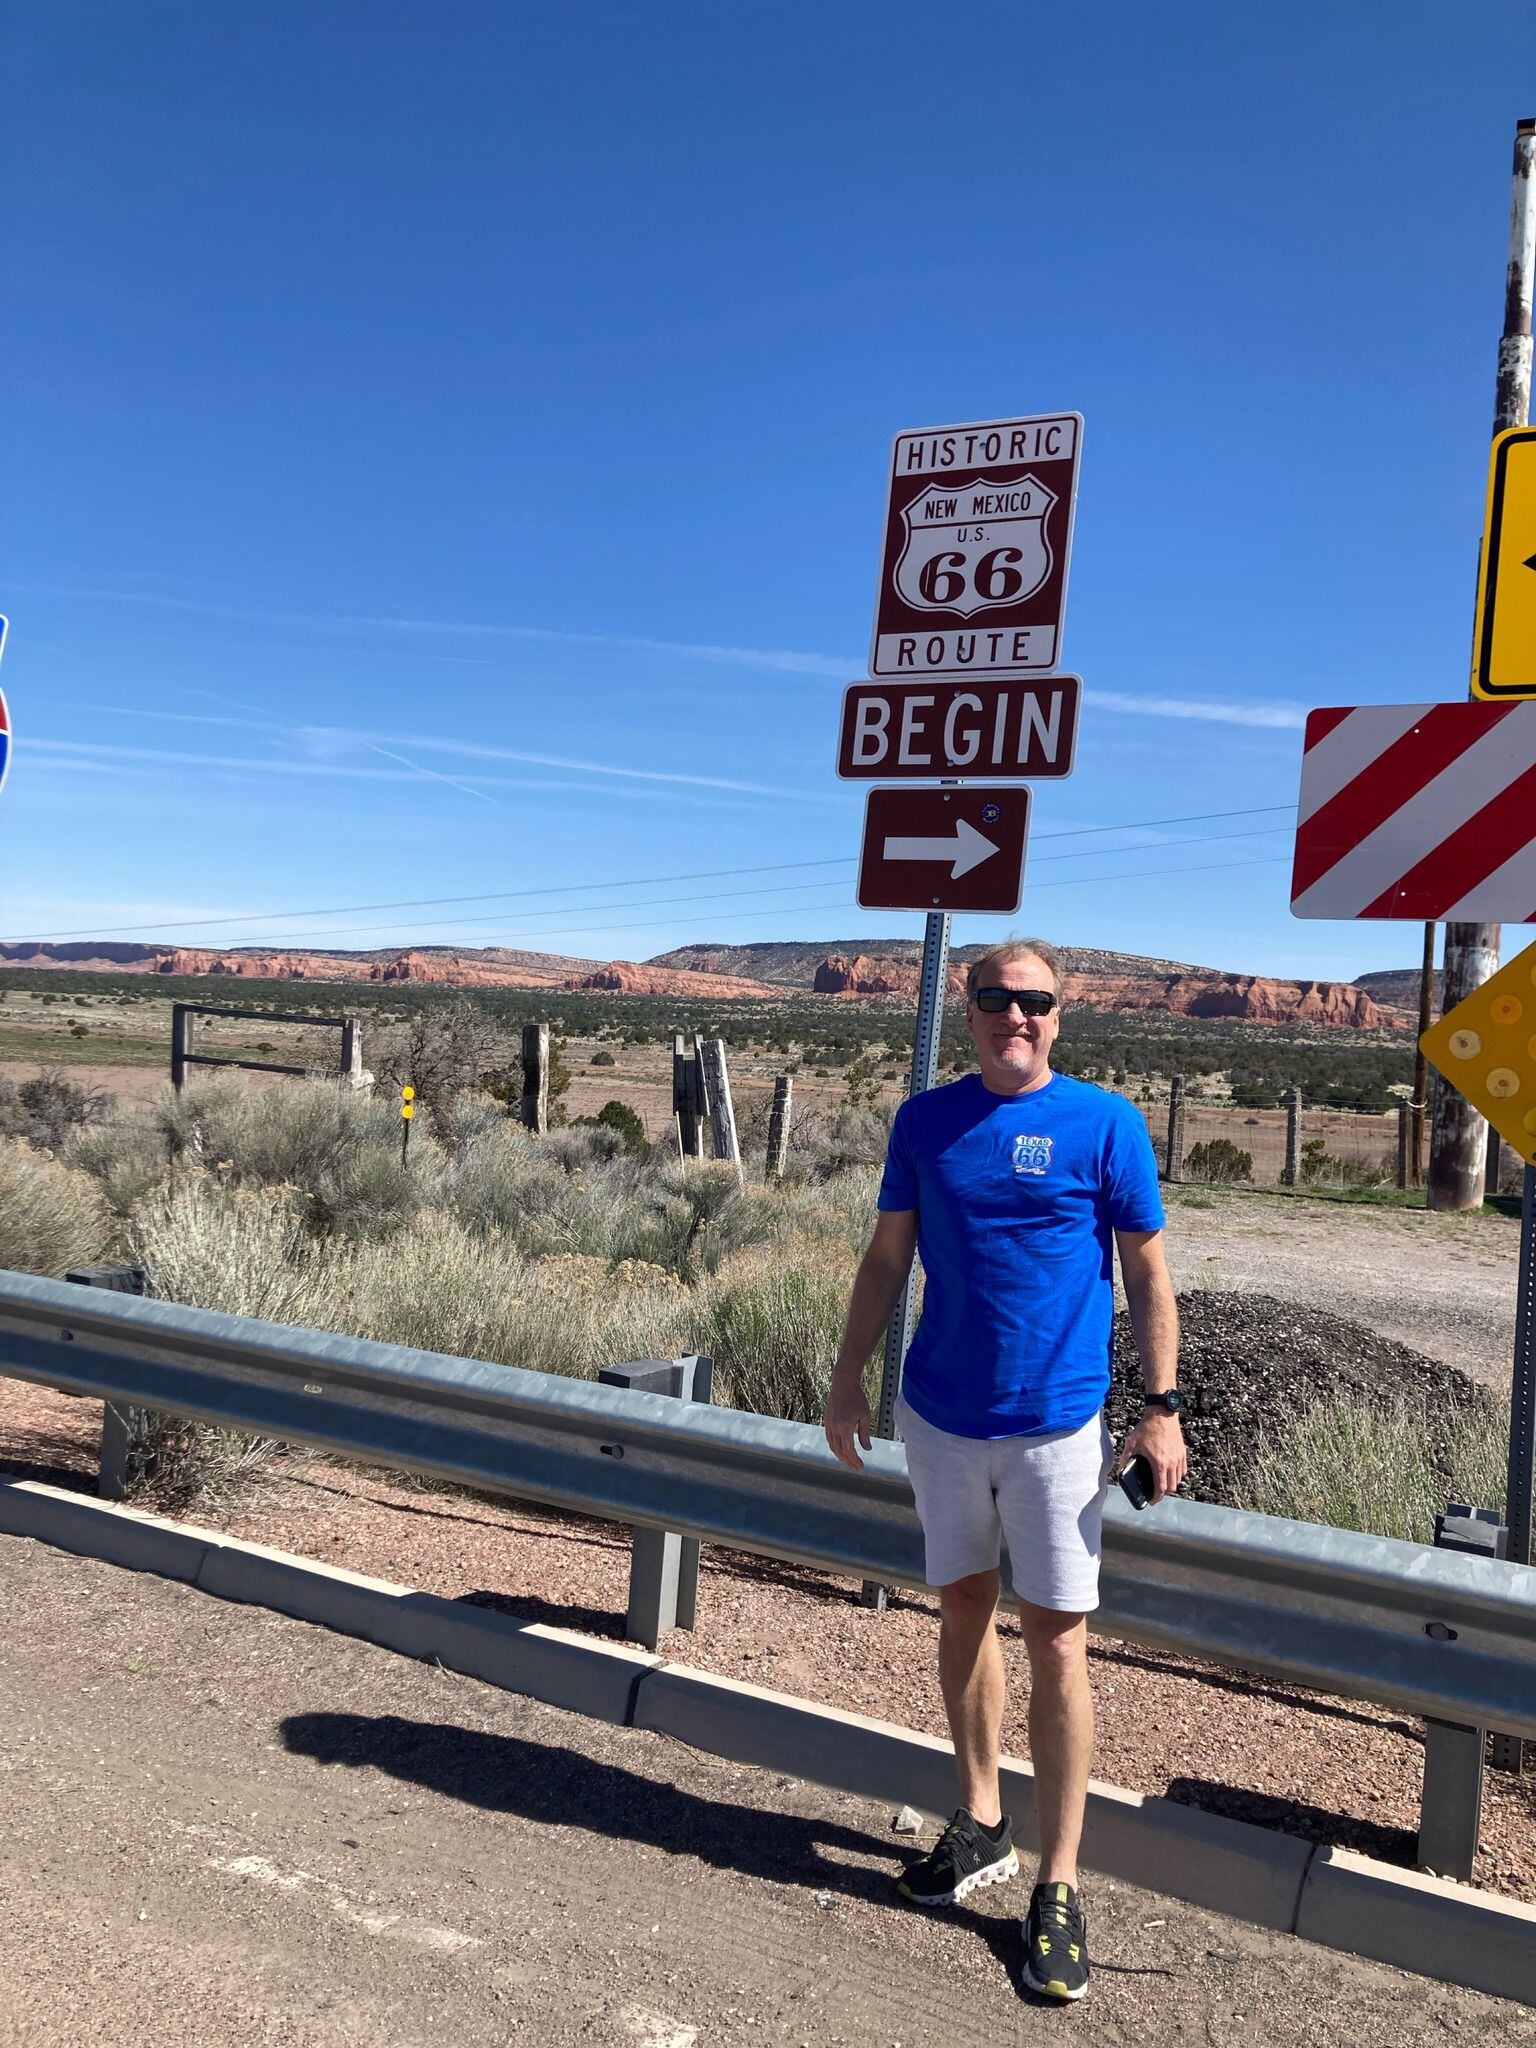 Slocum and crew rejoin historic Route 66 after a quick detour in New Mexico - en route to Flagstaff, AZ